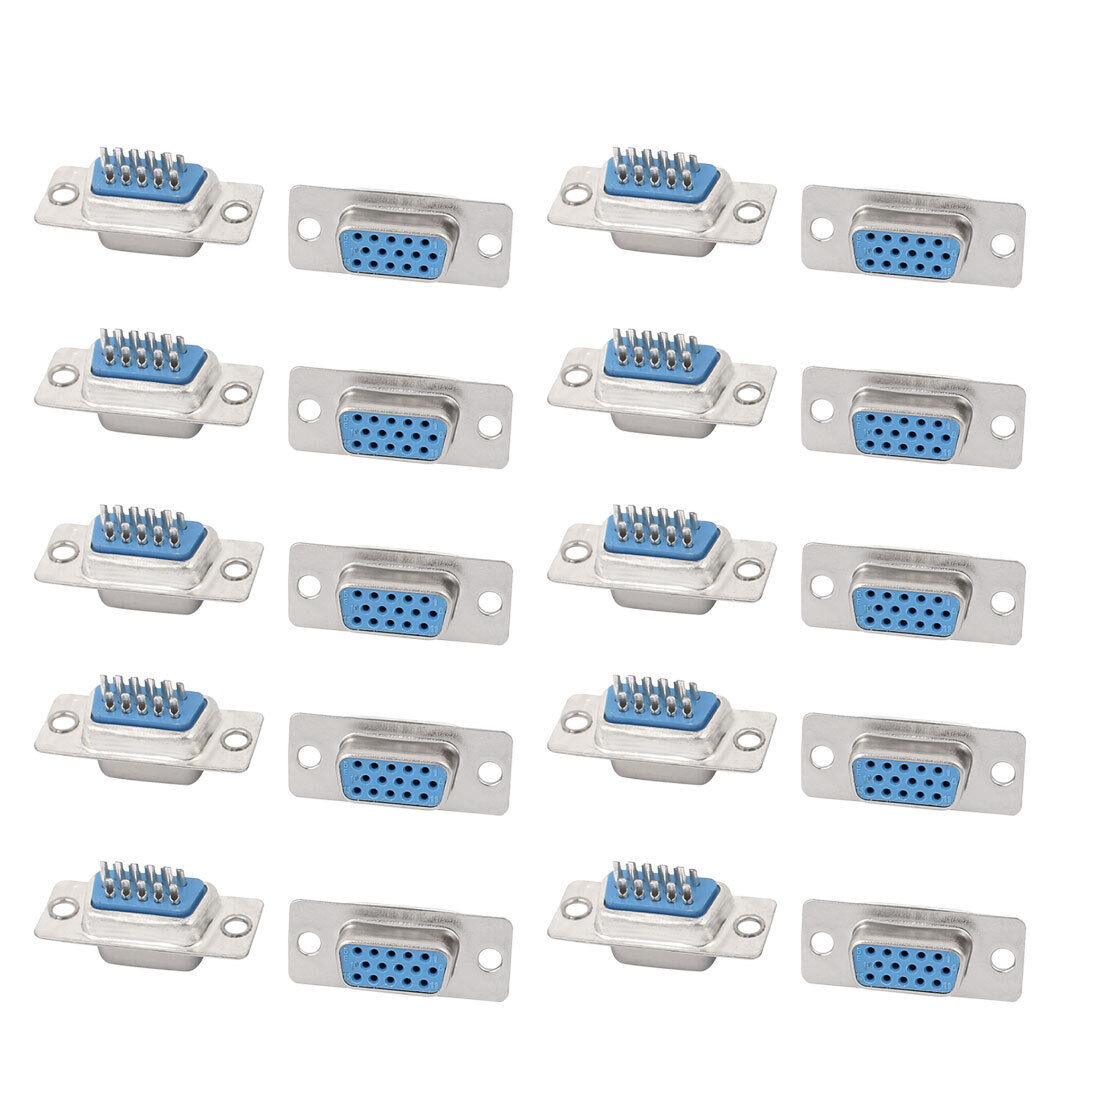 20Pcs D-SUB 3 Rows 15 Pin Female Solder Type Adapter Connector Straight Socket